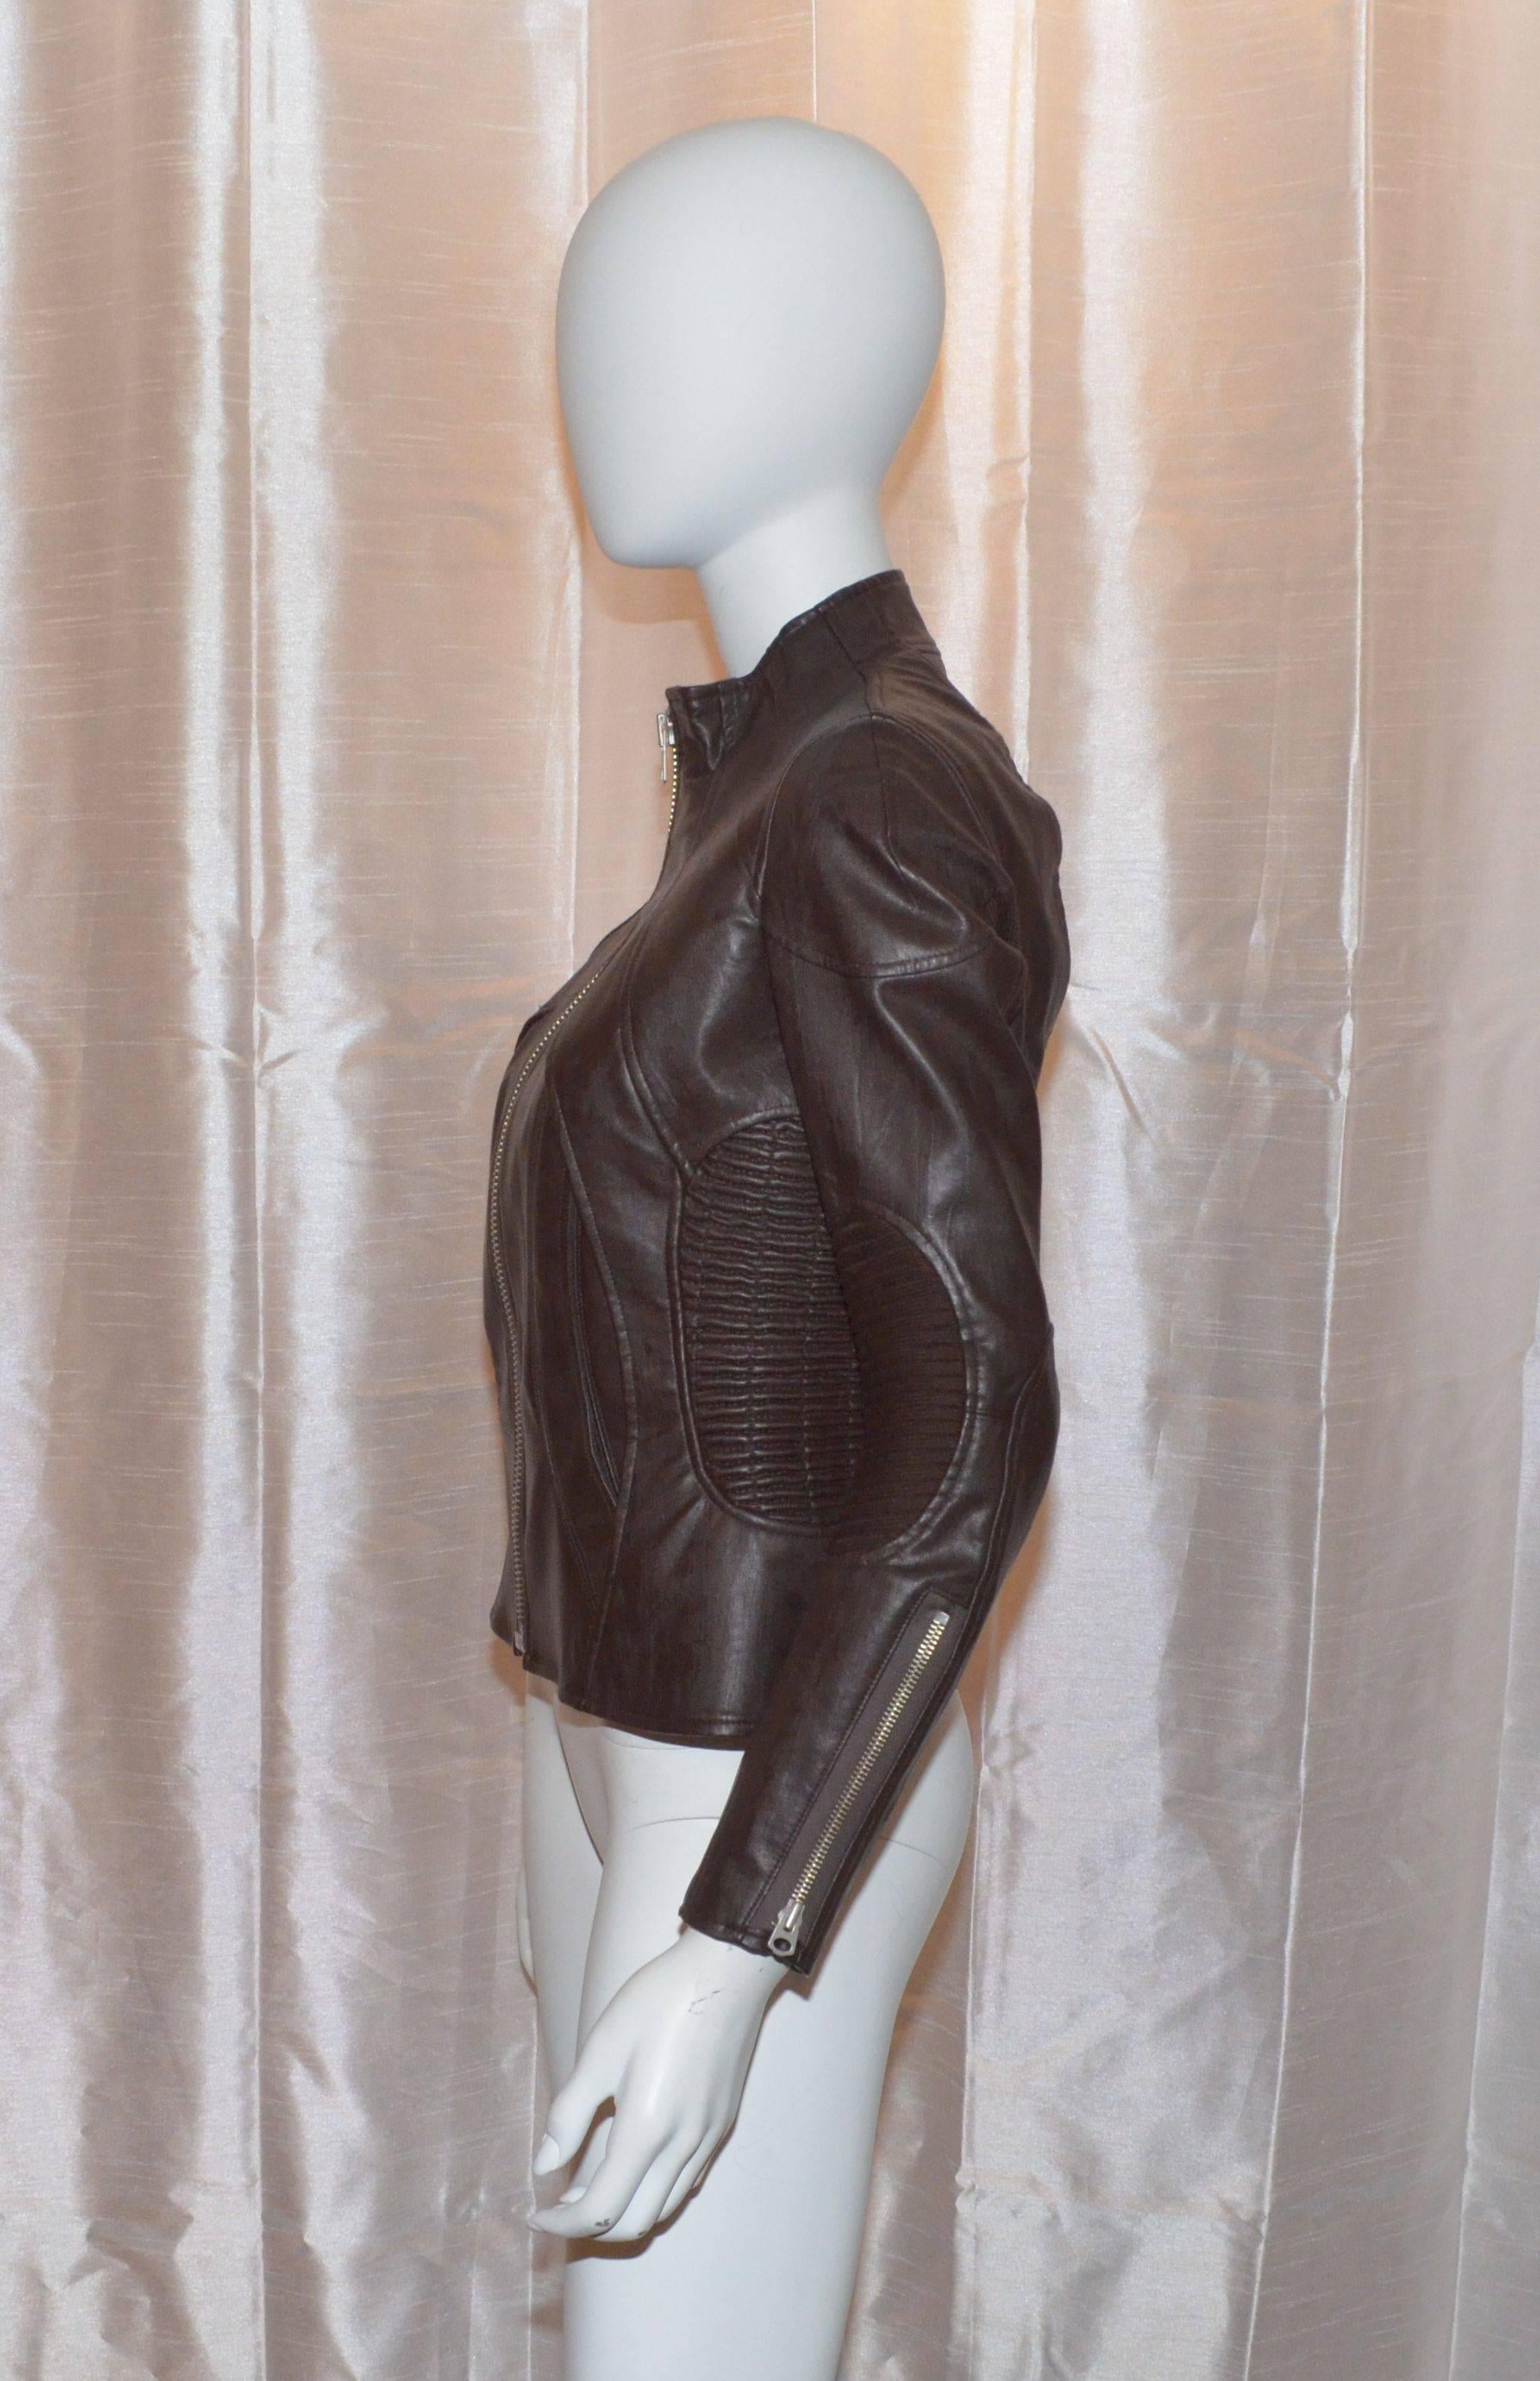 Jacket is made with 100% vegan leather, front zipper closure, ribbed stretchy side panels, ribbed elbow patches, and zippers on the cuffs. Jacket is fully lined and is made in Japan. Size M.

Measurements:
Bust - 34''
Sleeves - 23''
Shoulder to